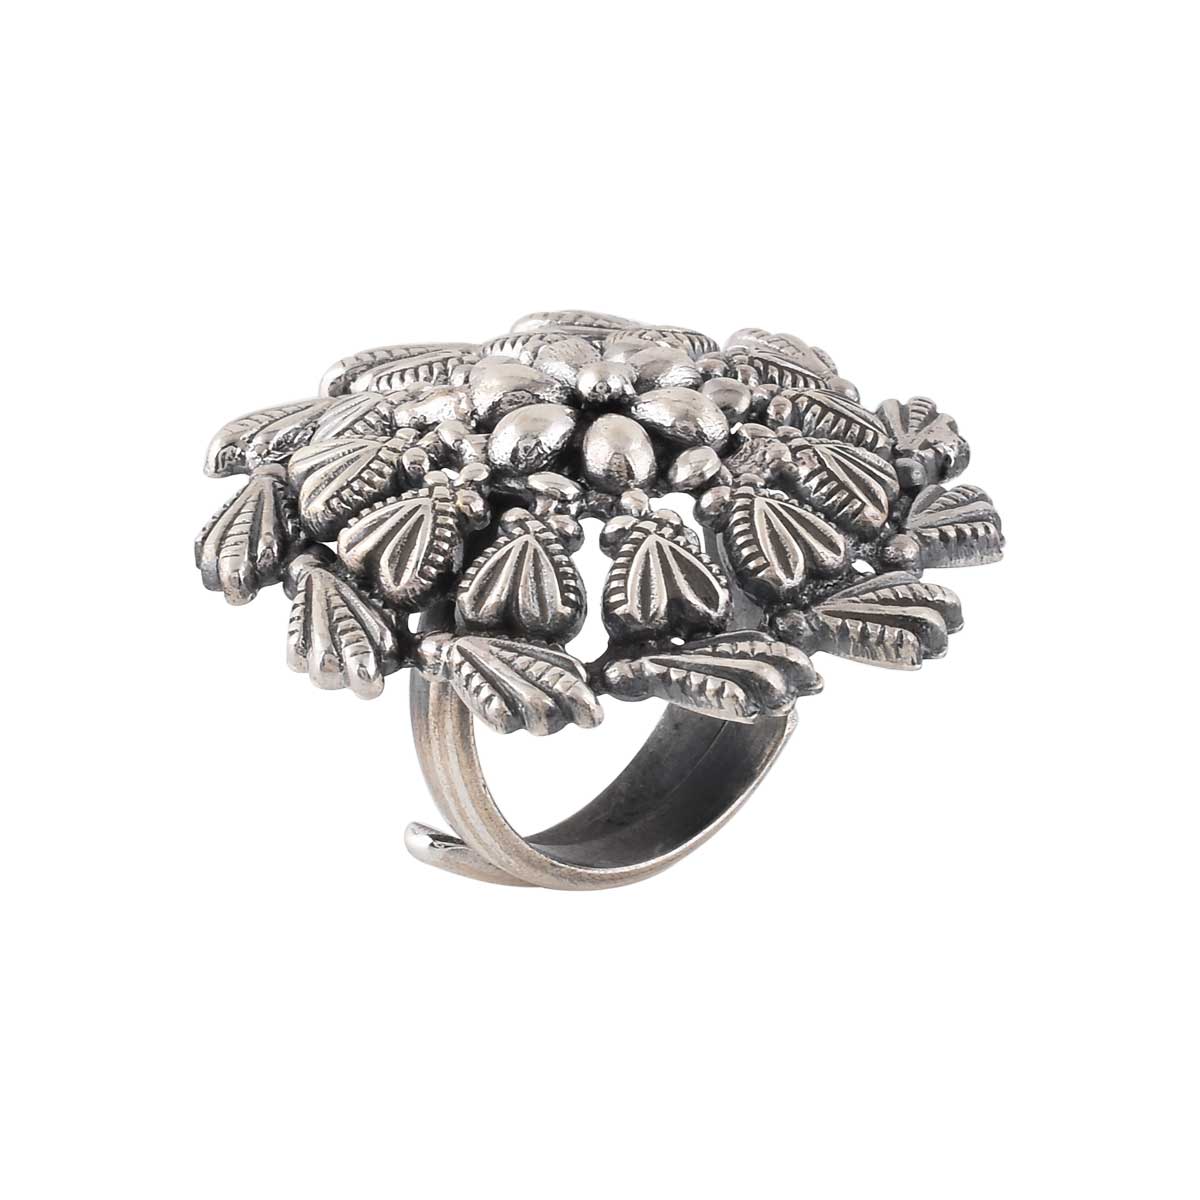 Antique Silver Round Ring